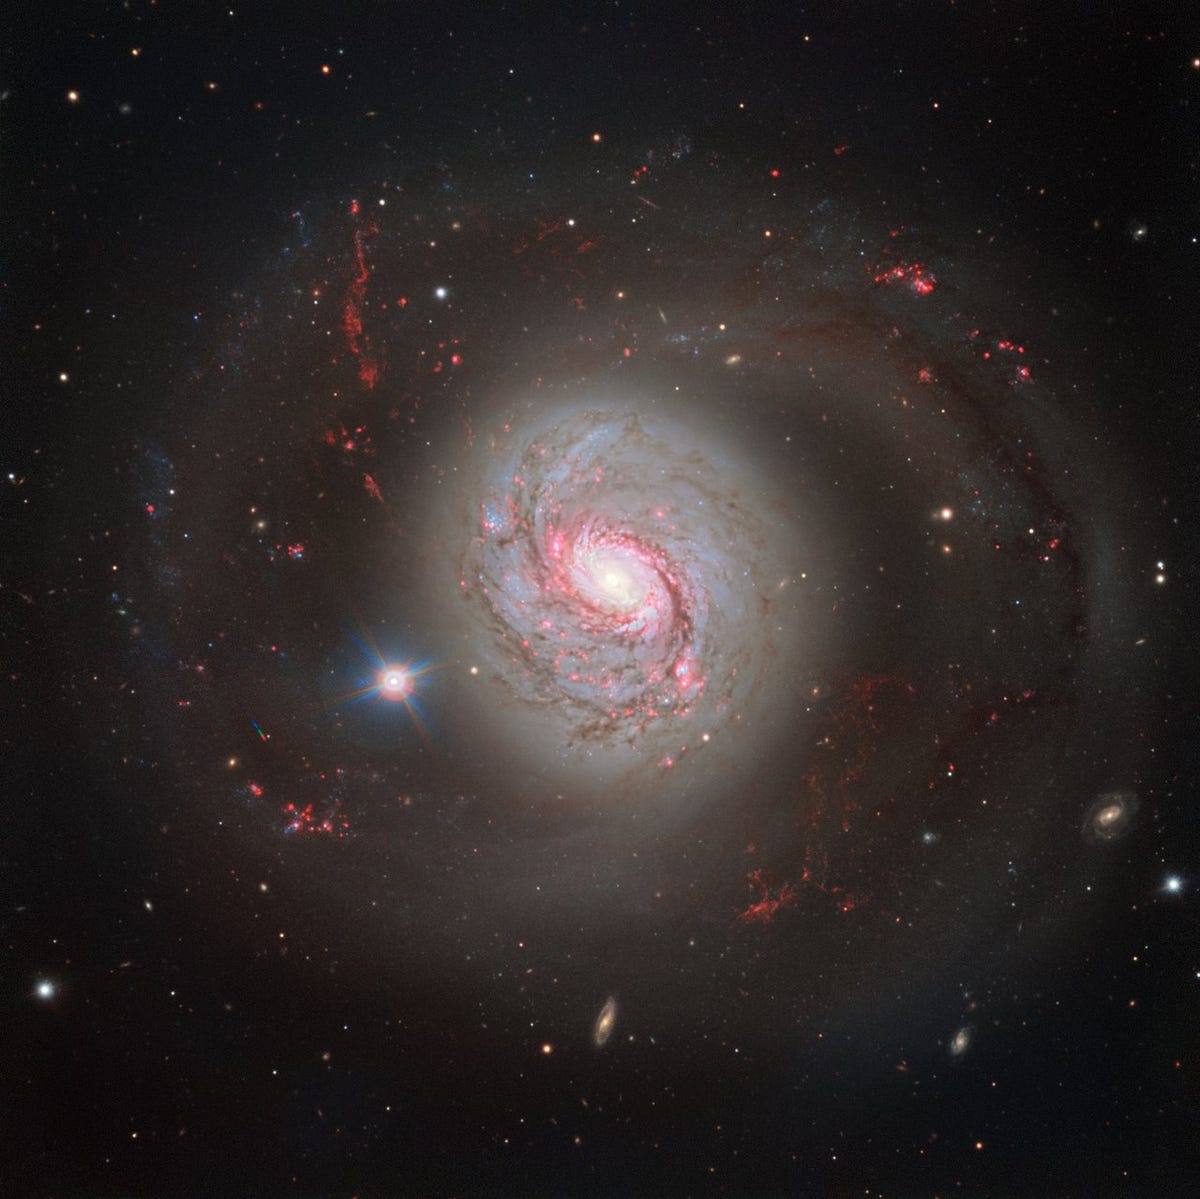 The barred spiral galaxy Messier 77